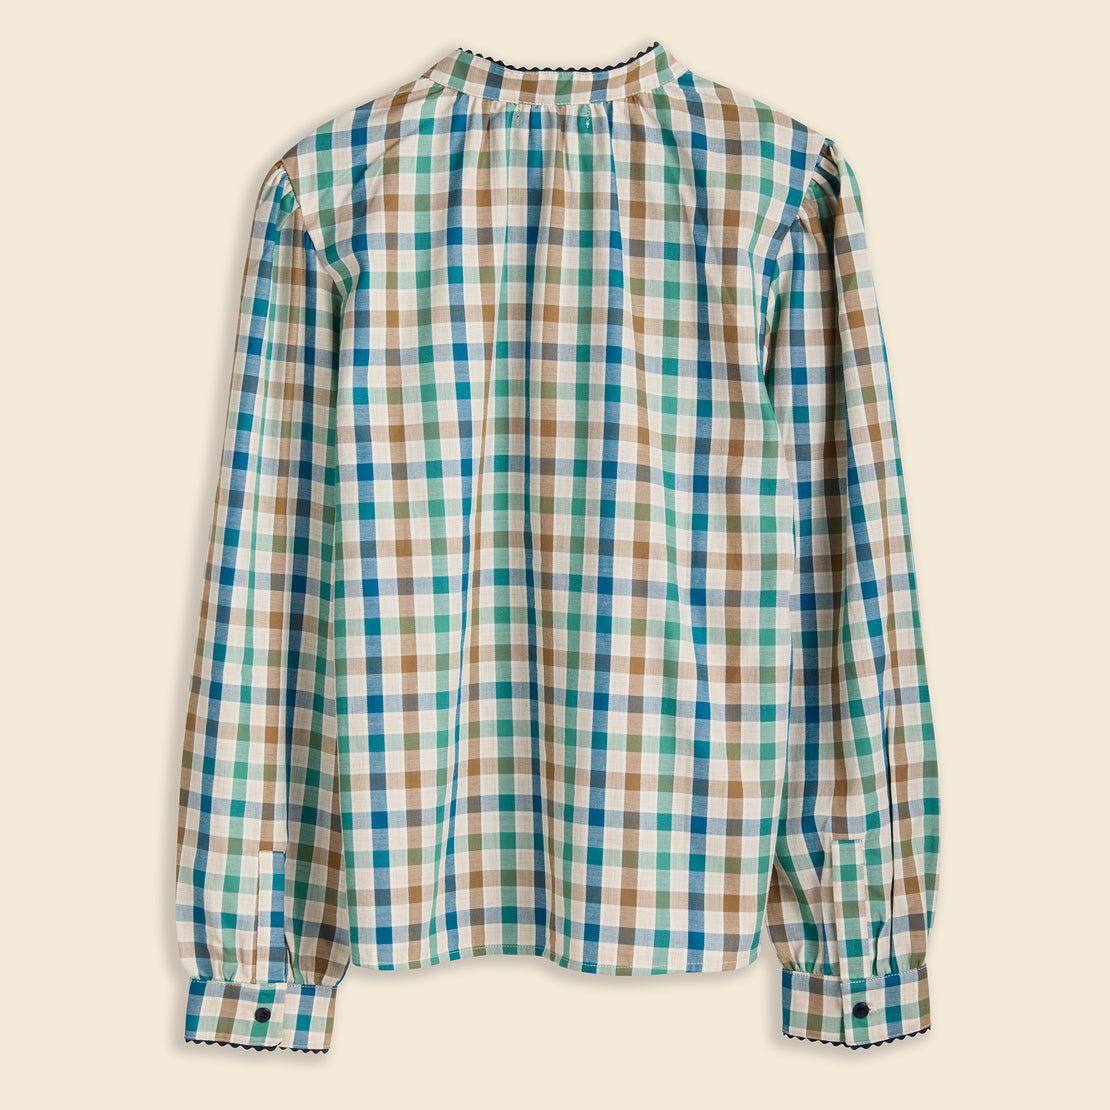 Celly - Colored Check Shirt - Green - Le Mont Saint Michel - STAG Provisions - W - Tops - L/S Woven